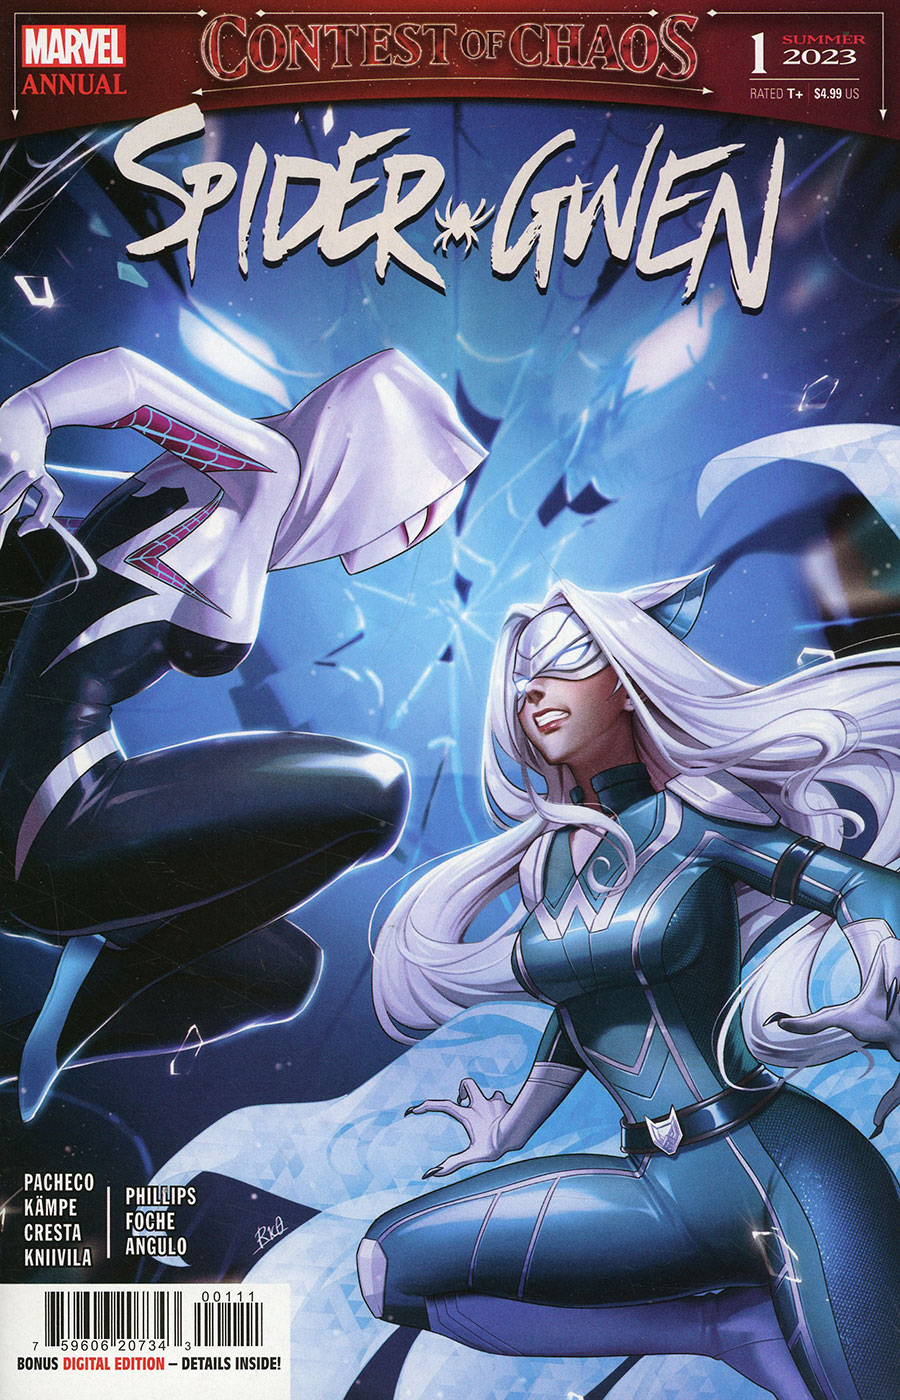 Spider-Gwen Vol 2 Annual (2023) #1 Cover A Regular R1C0 Cover (Contest Of Chaos Tie-In)